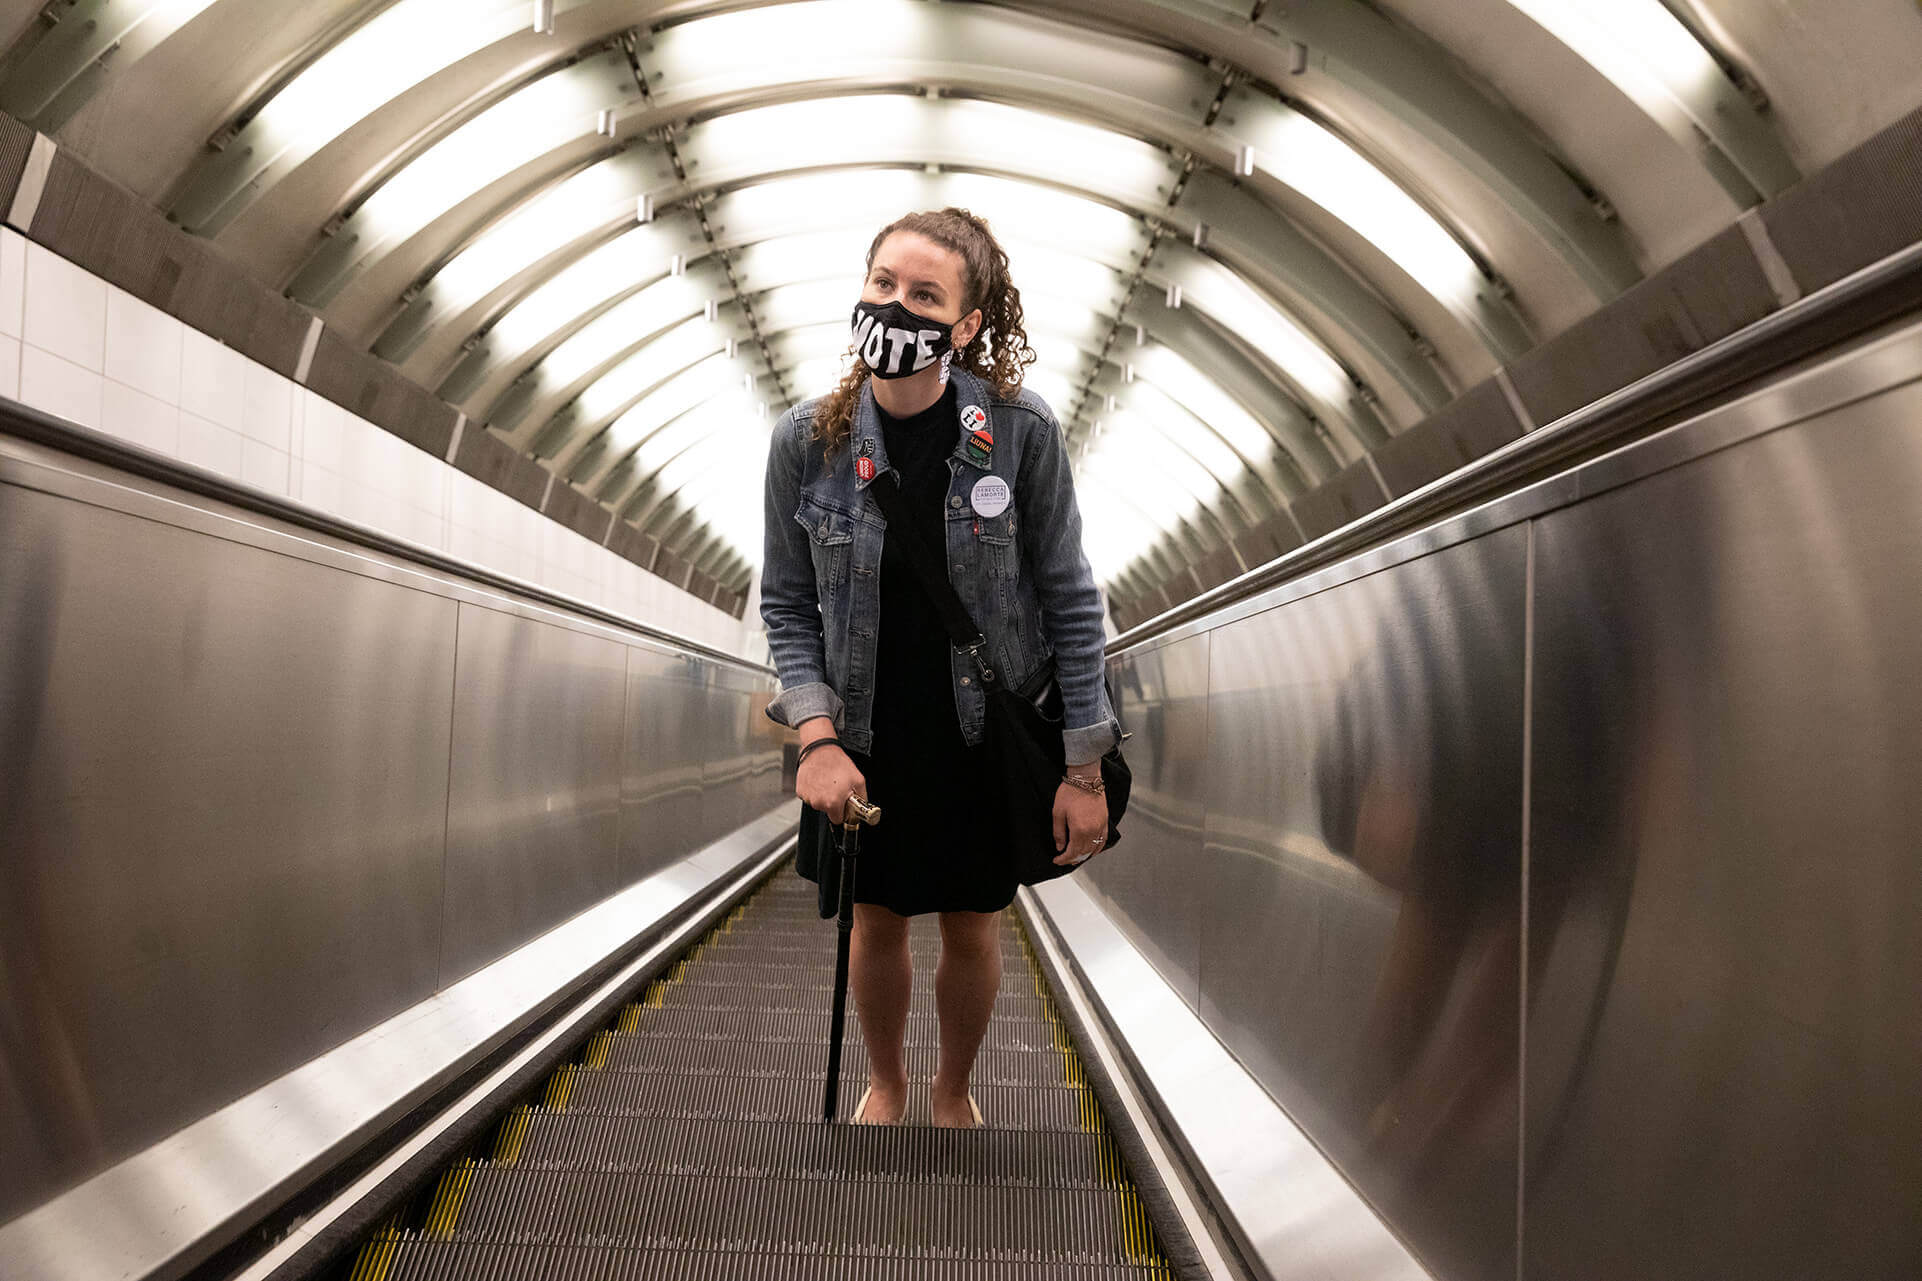 Rebecca rides up a subway station's escalator, wearing her “Vote” mask.